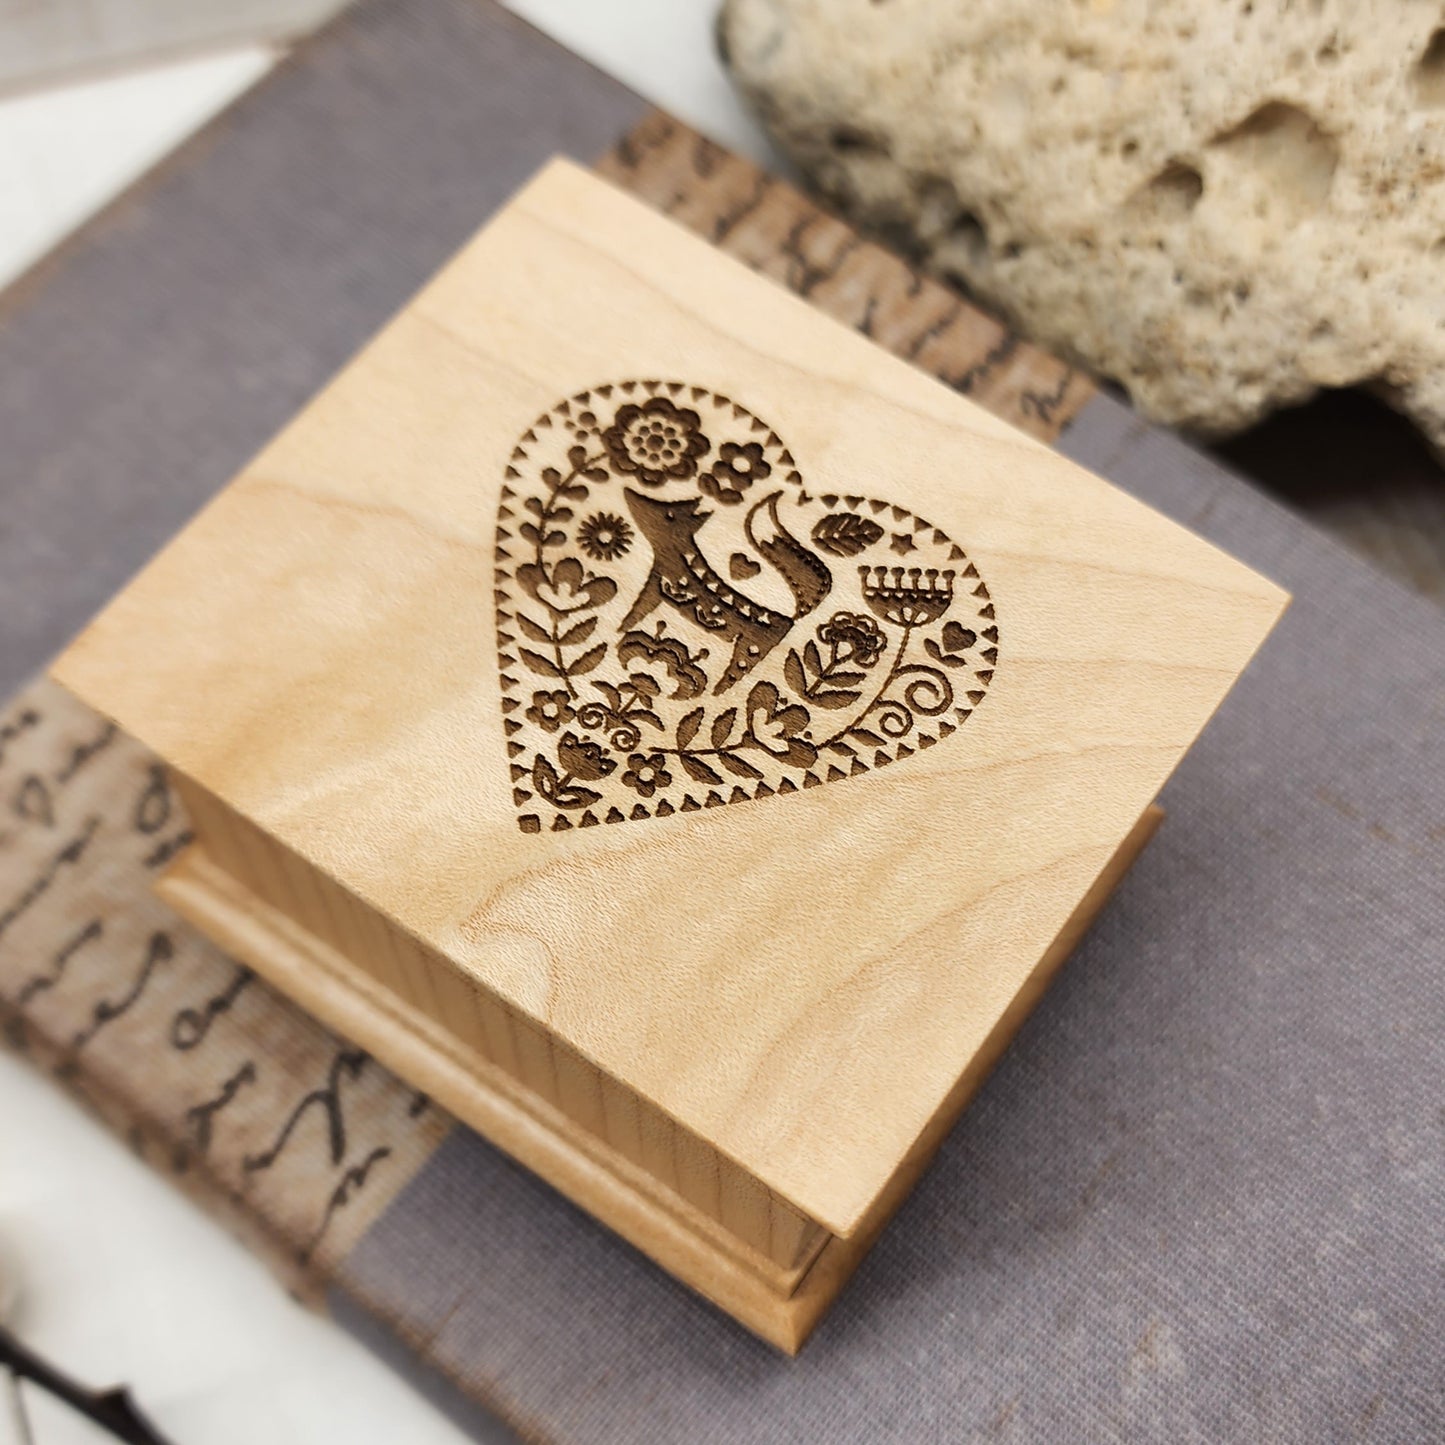 music box with fox in a heart engraving